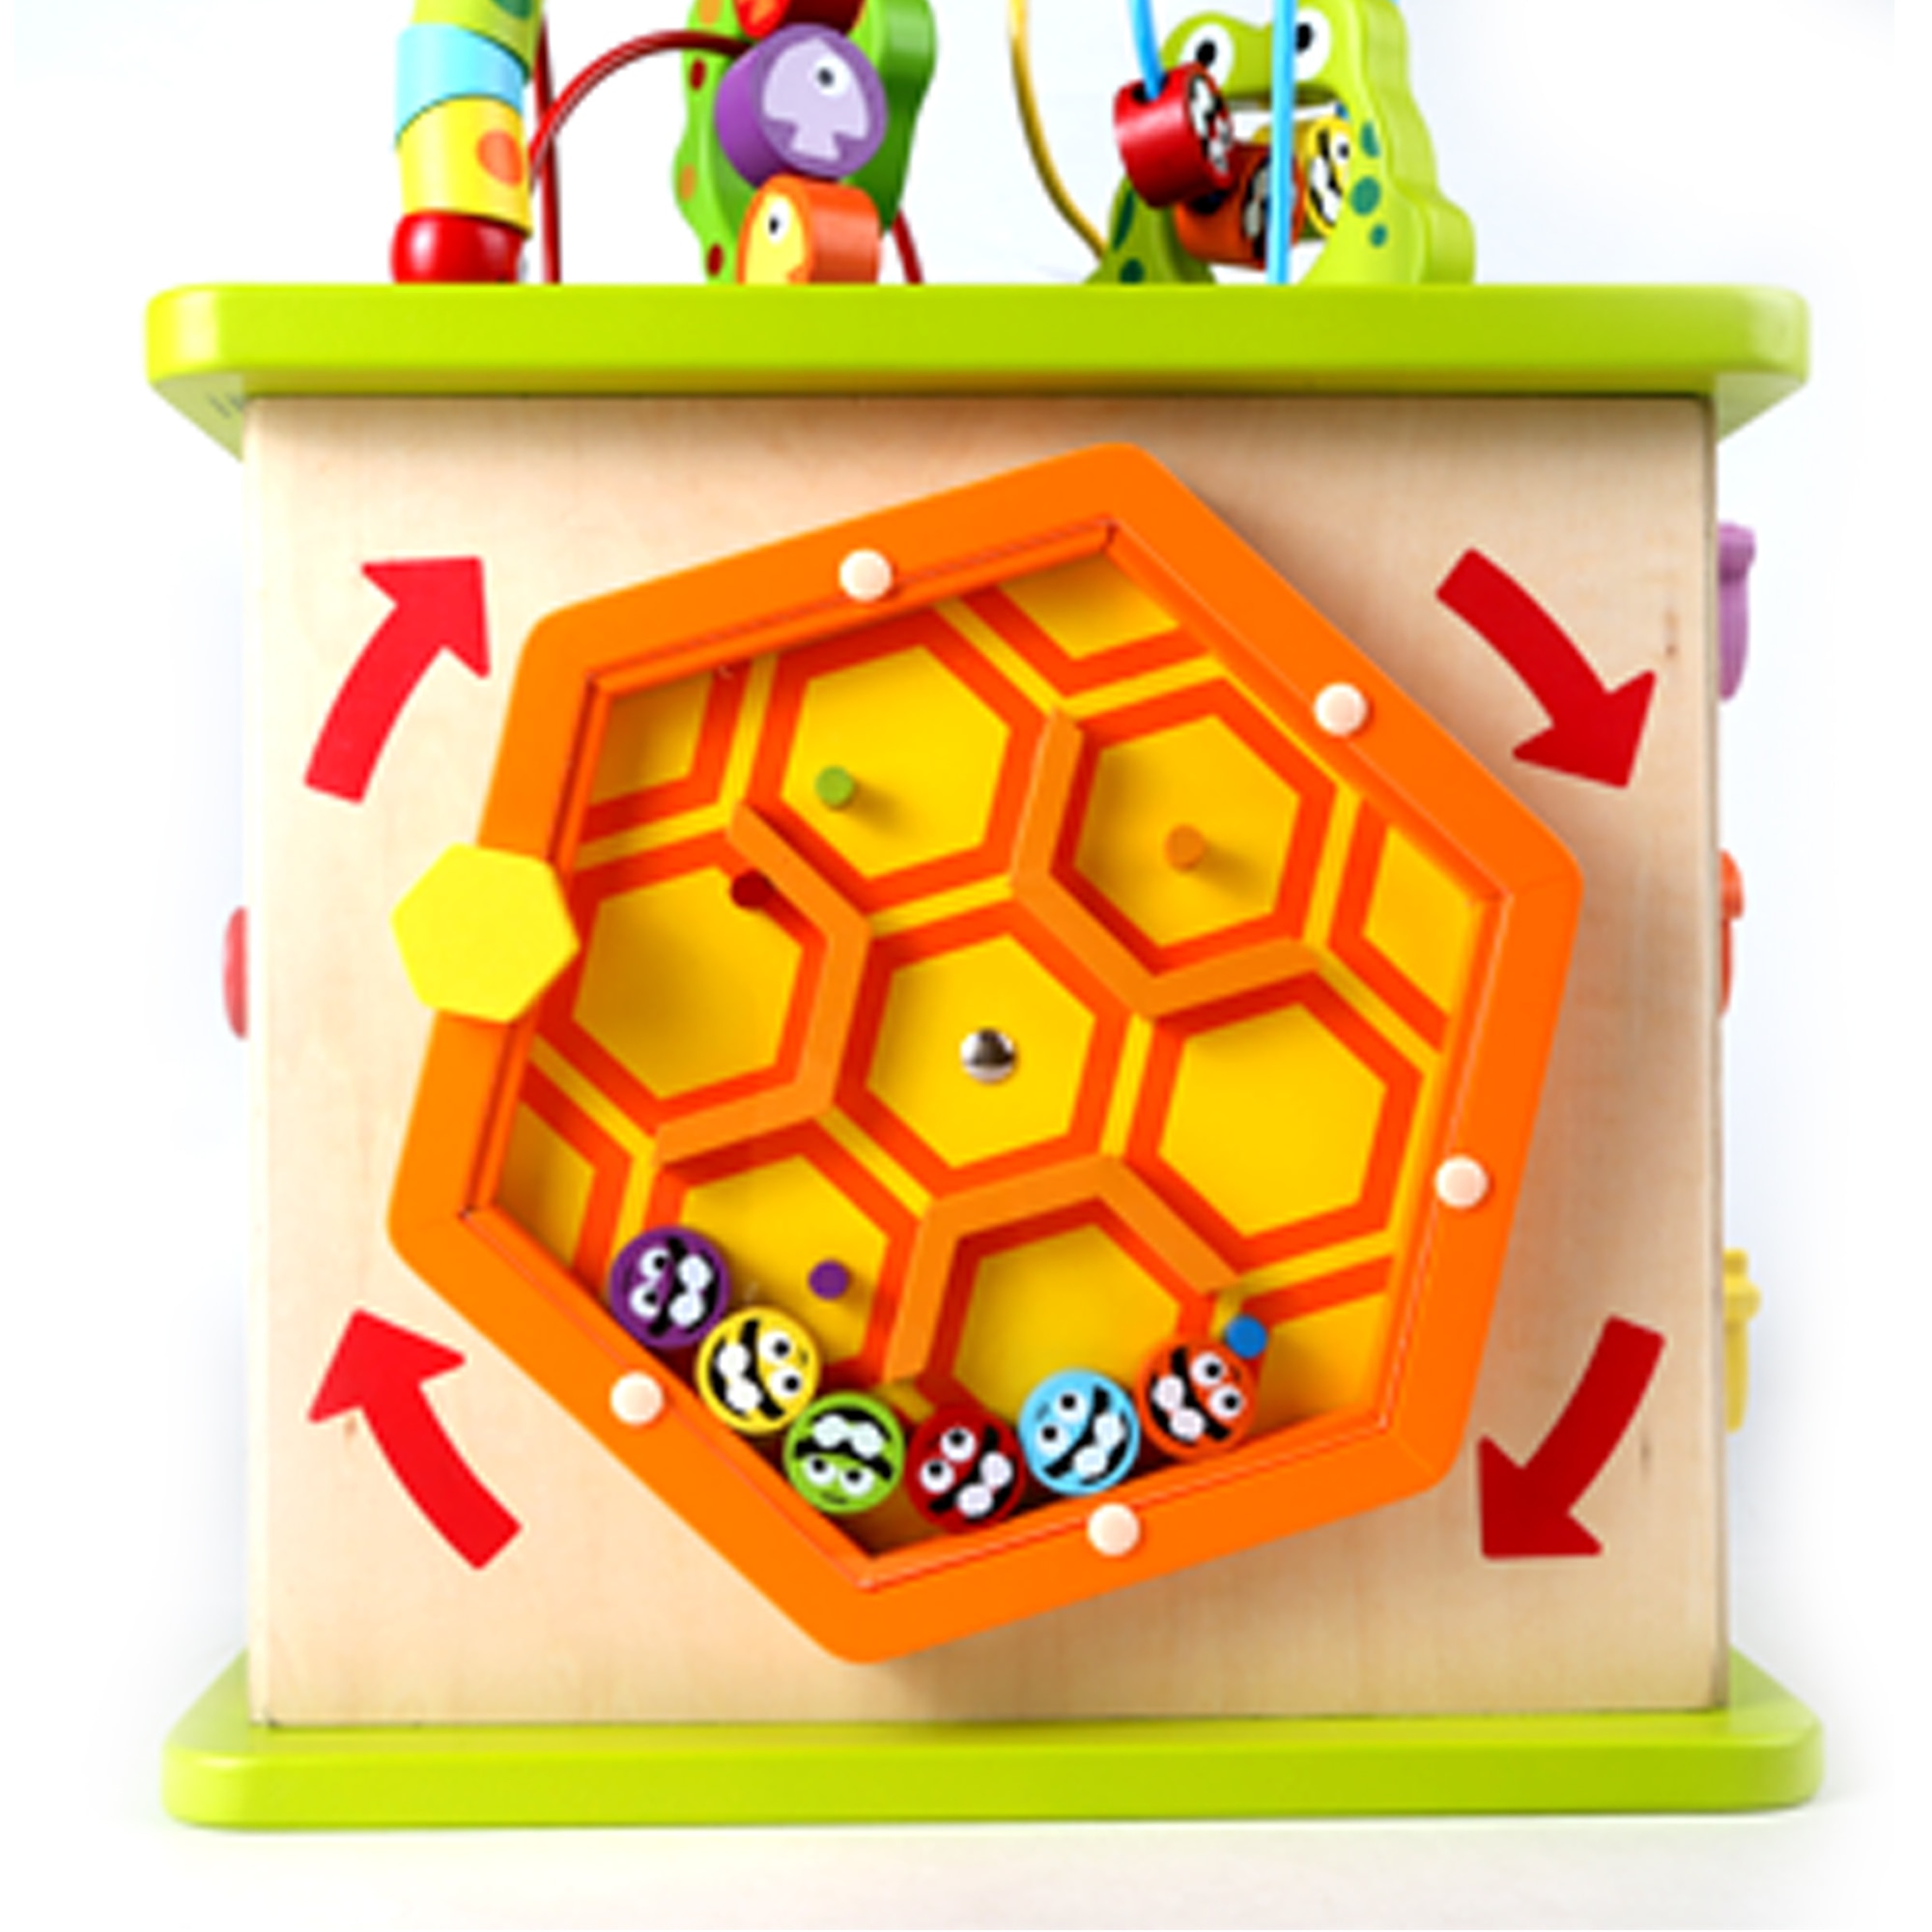 Hape Country Critters 5-Sided Wooden Play Cube for Toddlers, Ages 12 mo+ - image 5 of 8